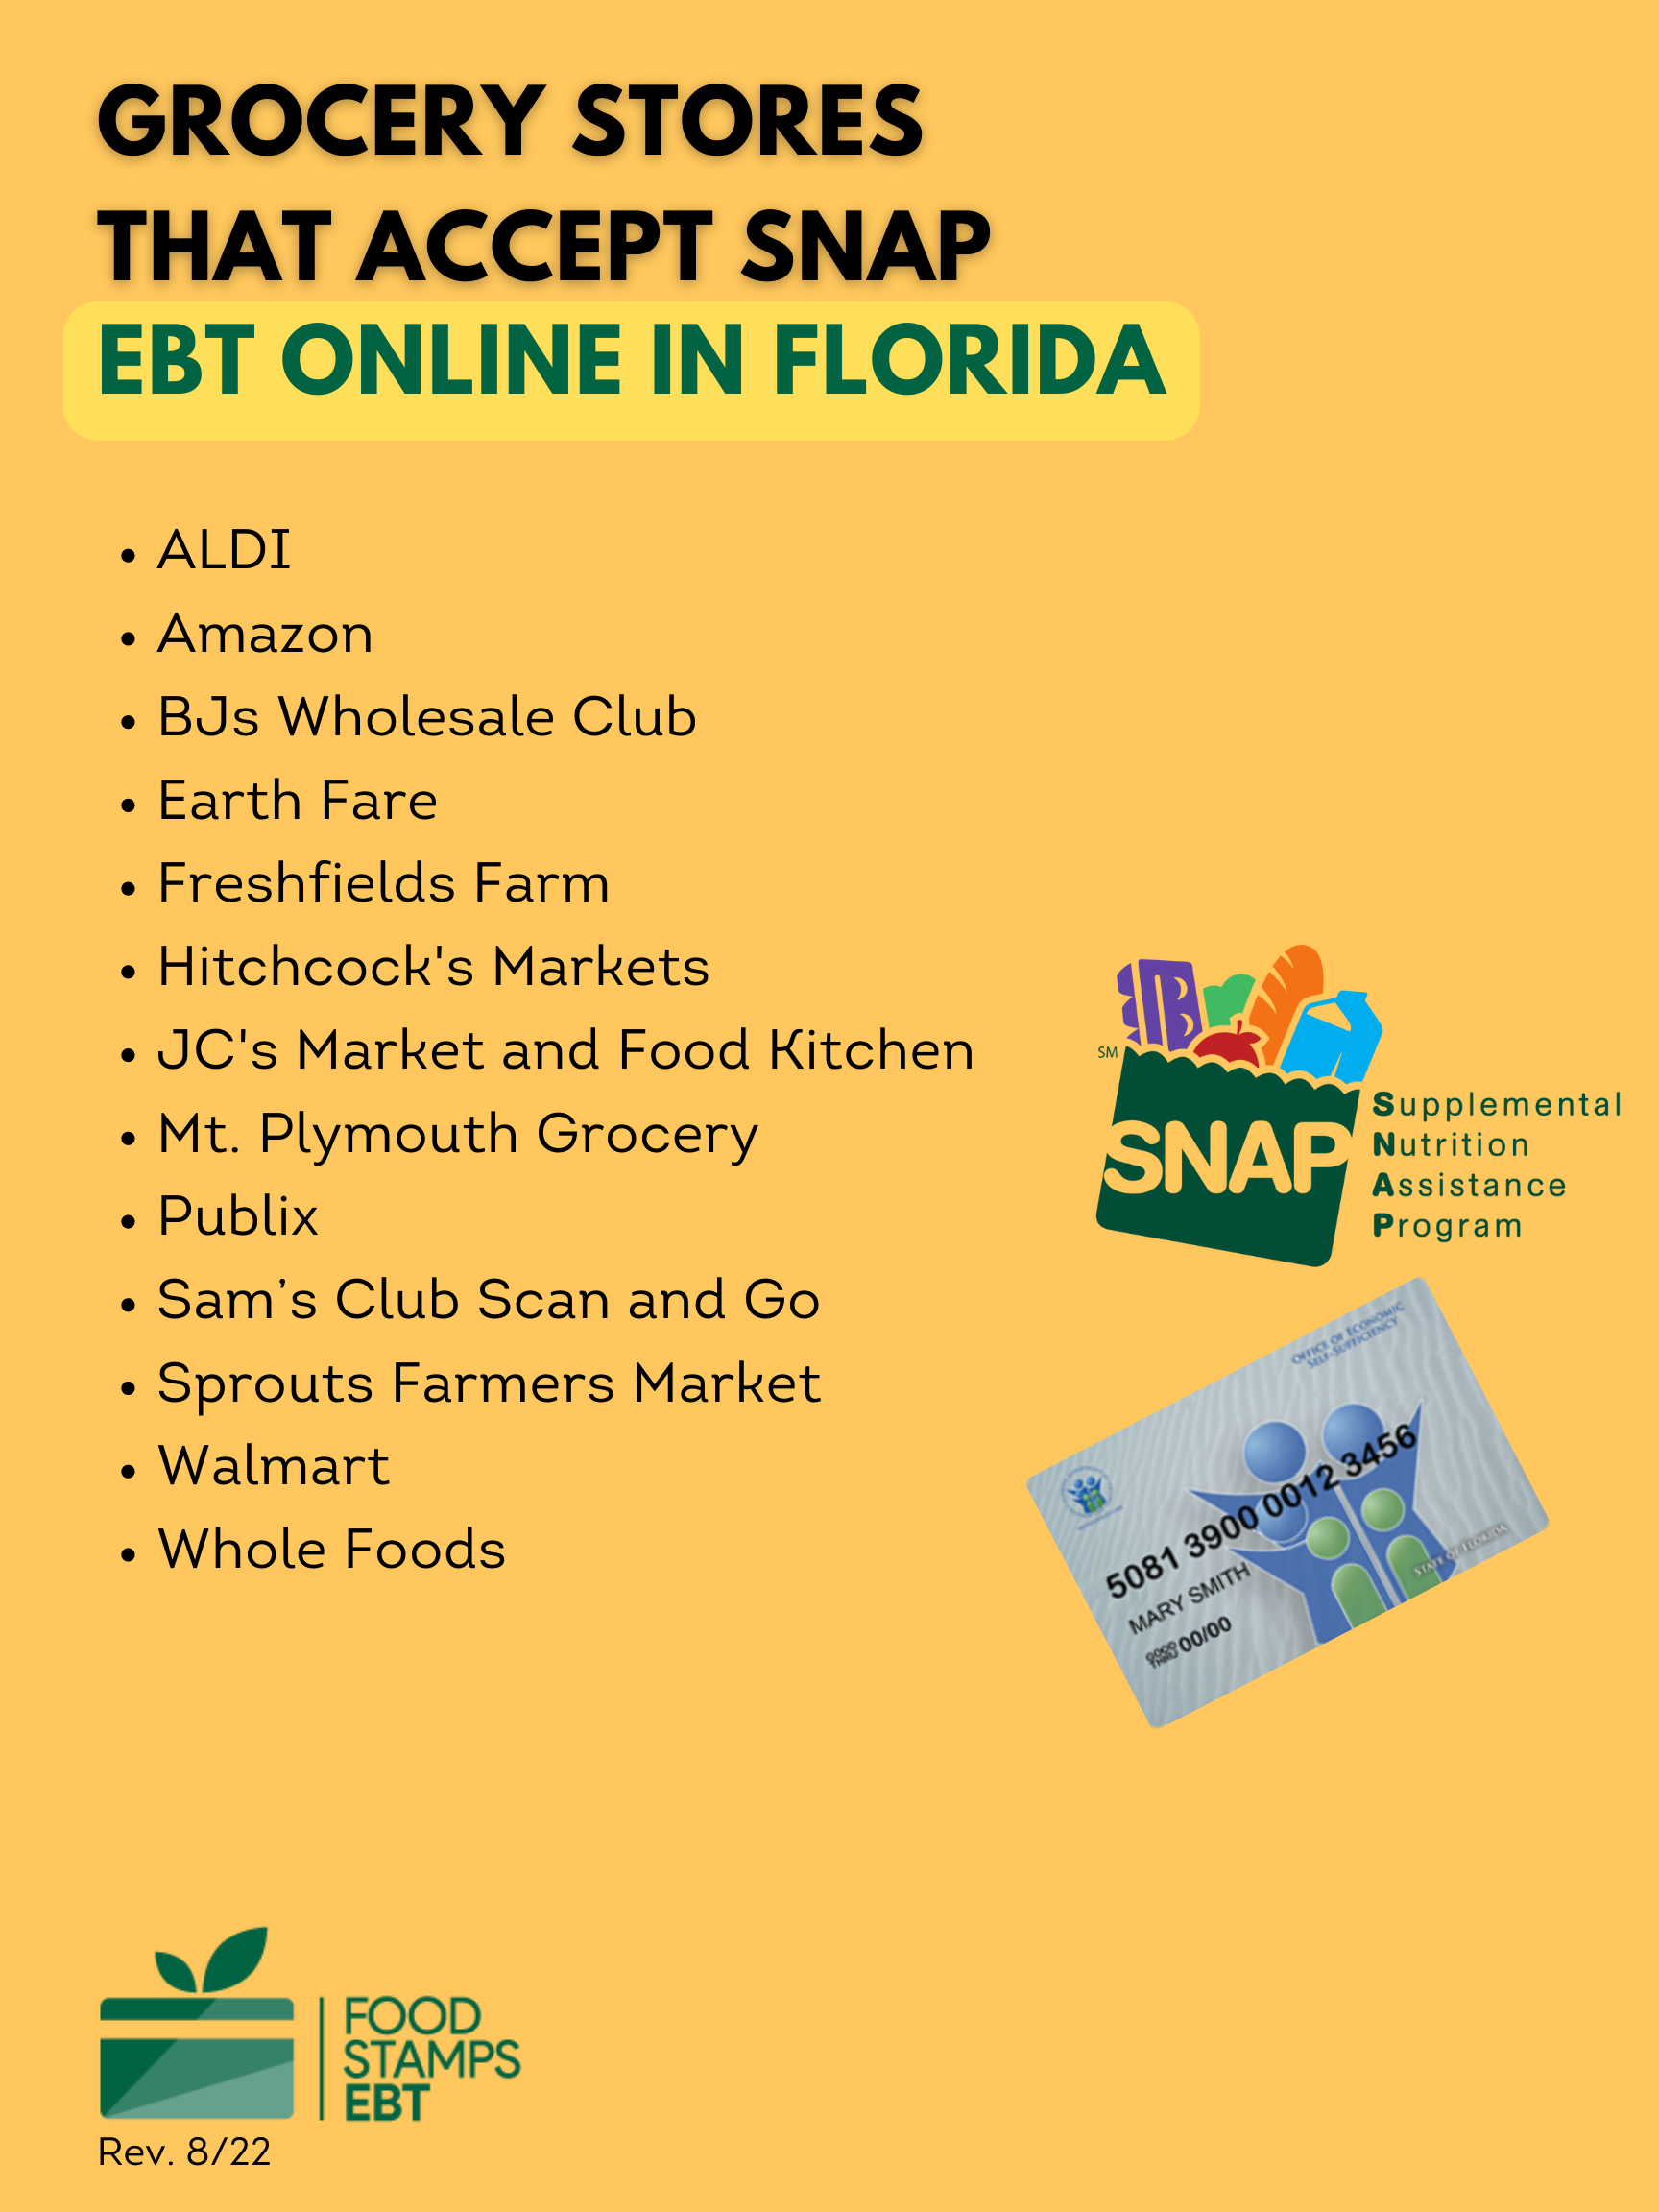 "Grocery stores that take EBT online in Florida"